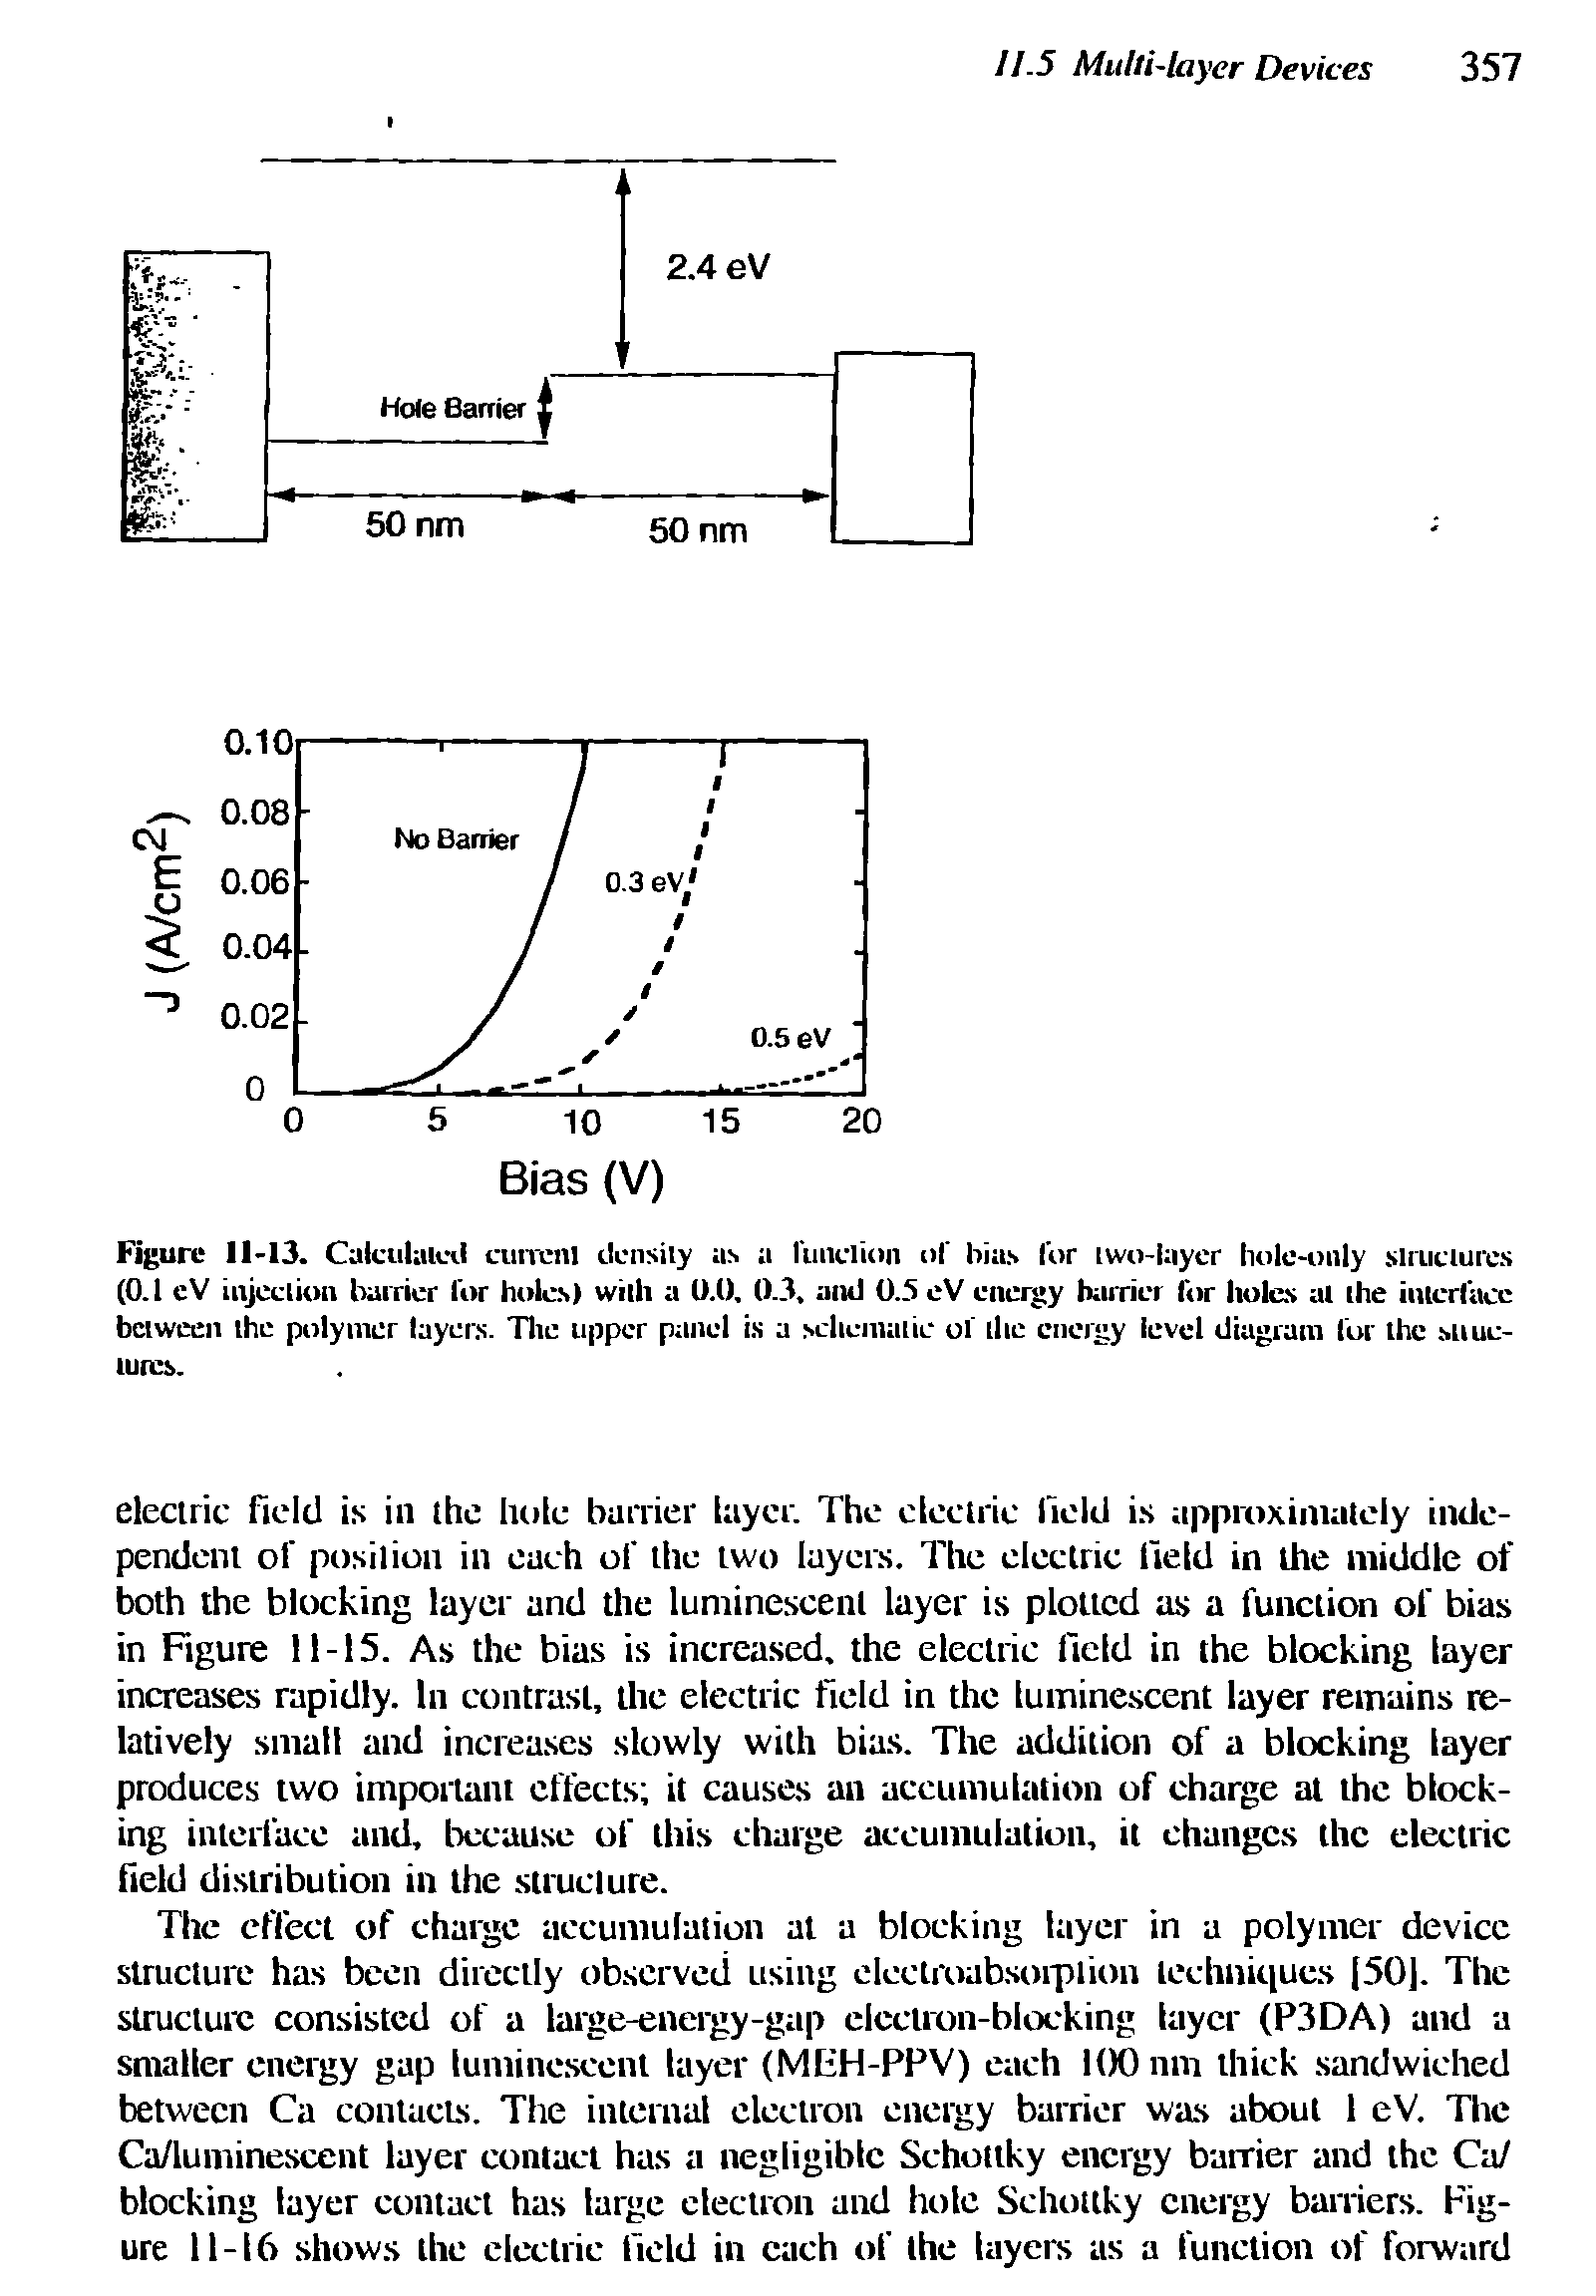 Figure 11-13. Calculated current density as a limelion of bias lor two-layer hole-only structures (0.1 eV injection barrier lor holes) with a 0.0, 0.3, and 0.5 eV energy harrier for holes at the interface between the polymer layers. The upper panel is a schematic of the energy level diagram for the sttuc-turcs.